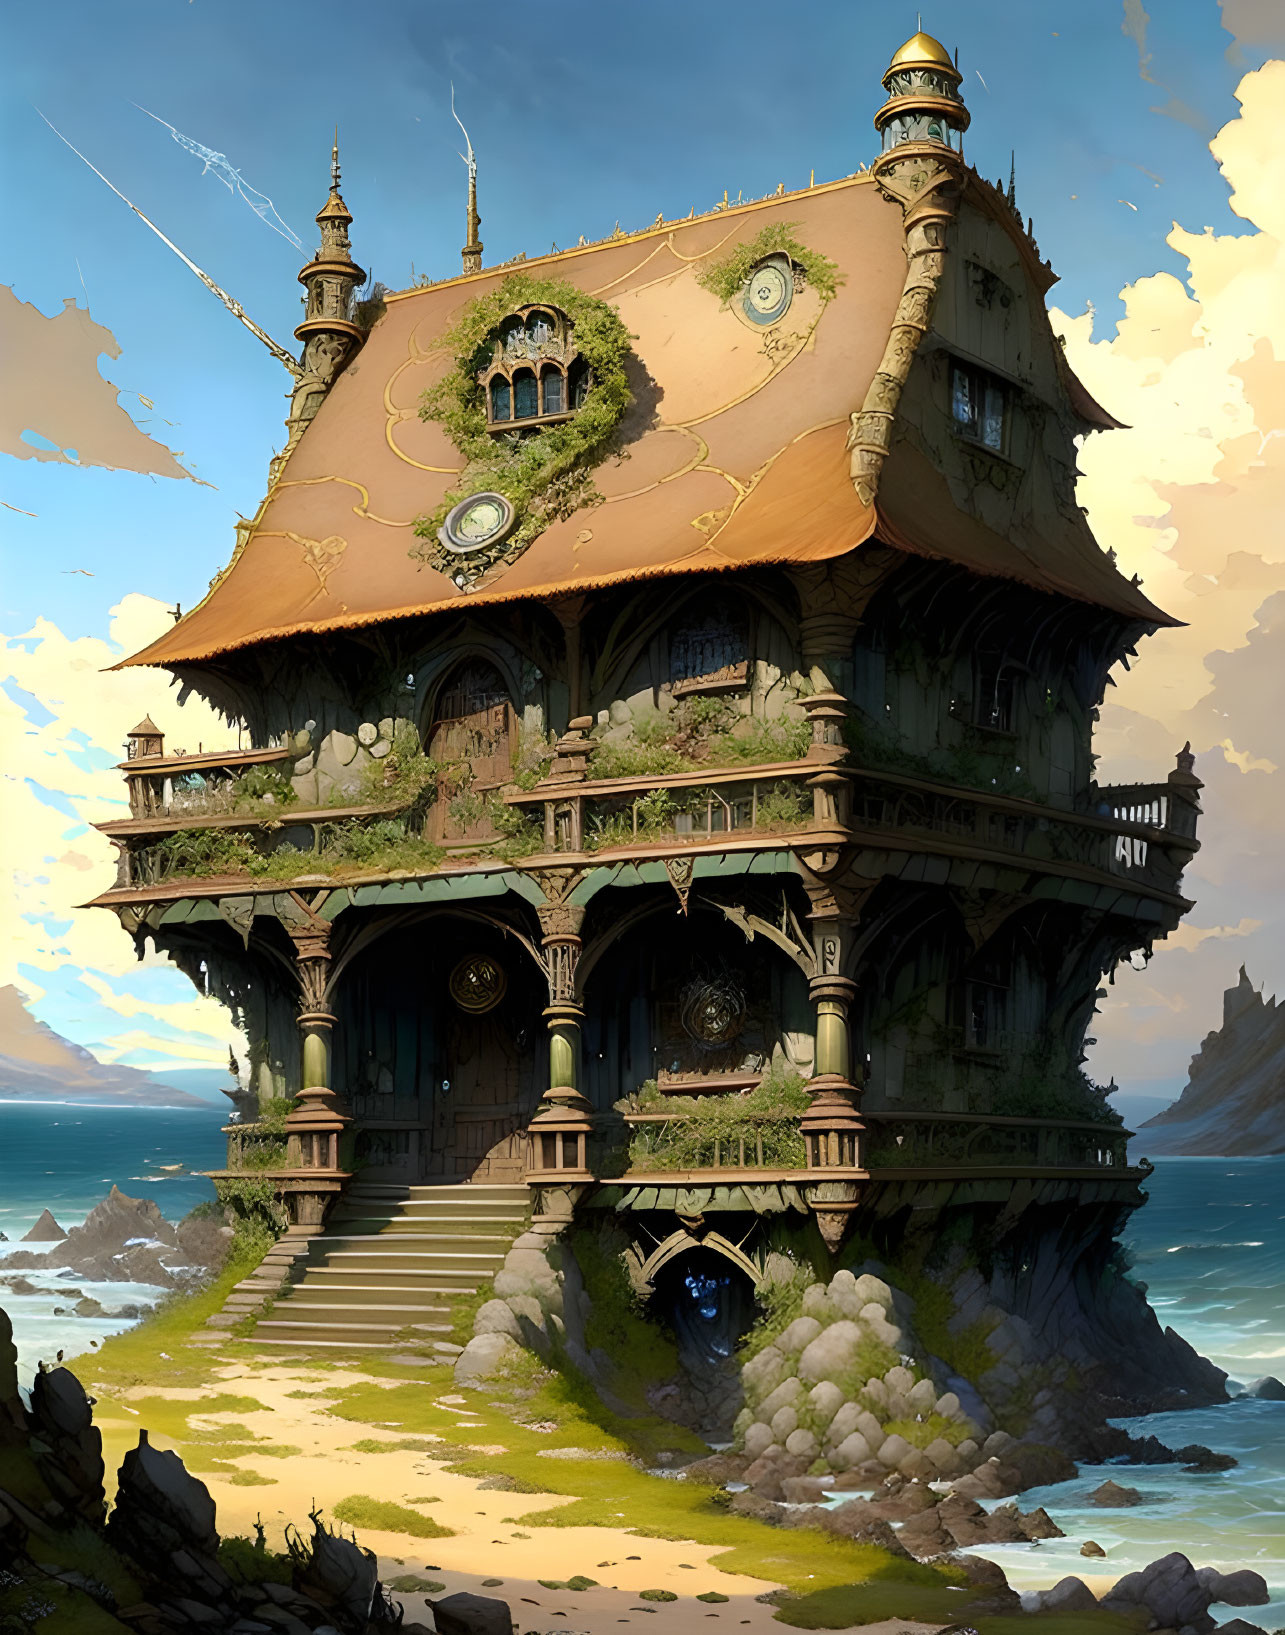 Unique Cliffside House with Turrets and Greenery